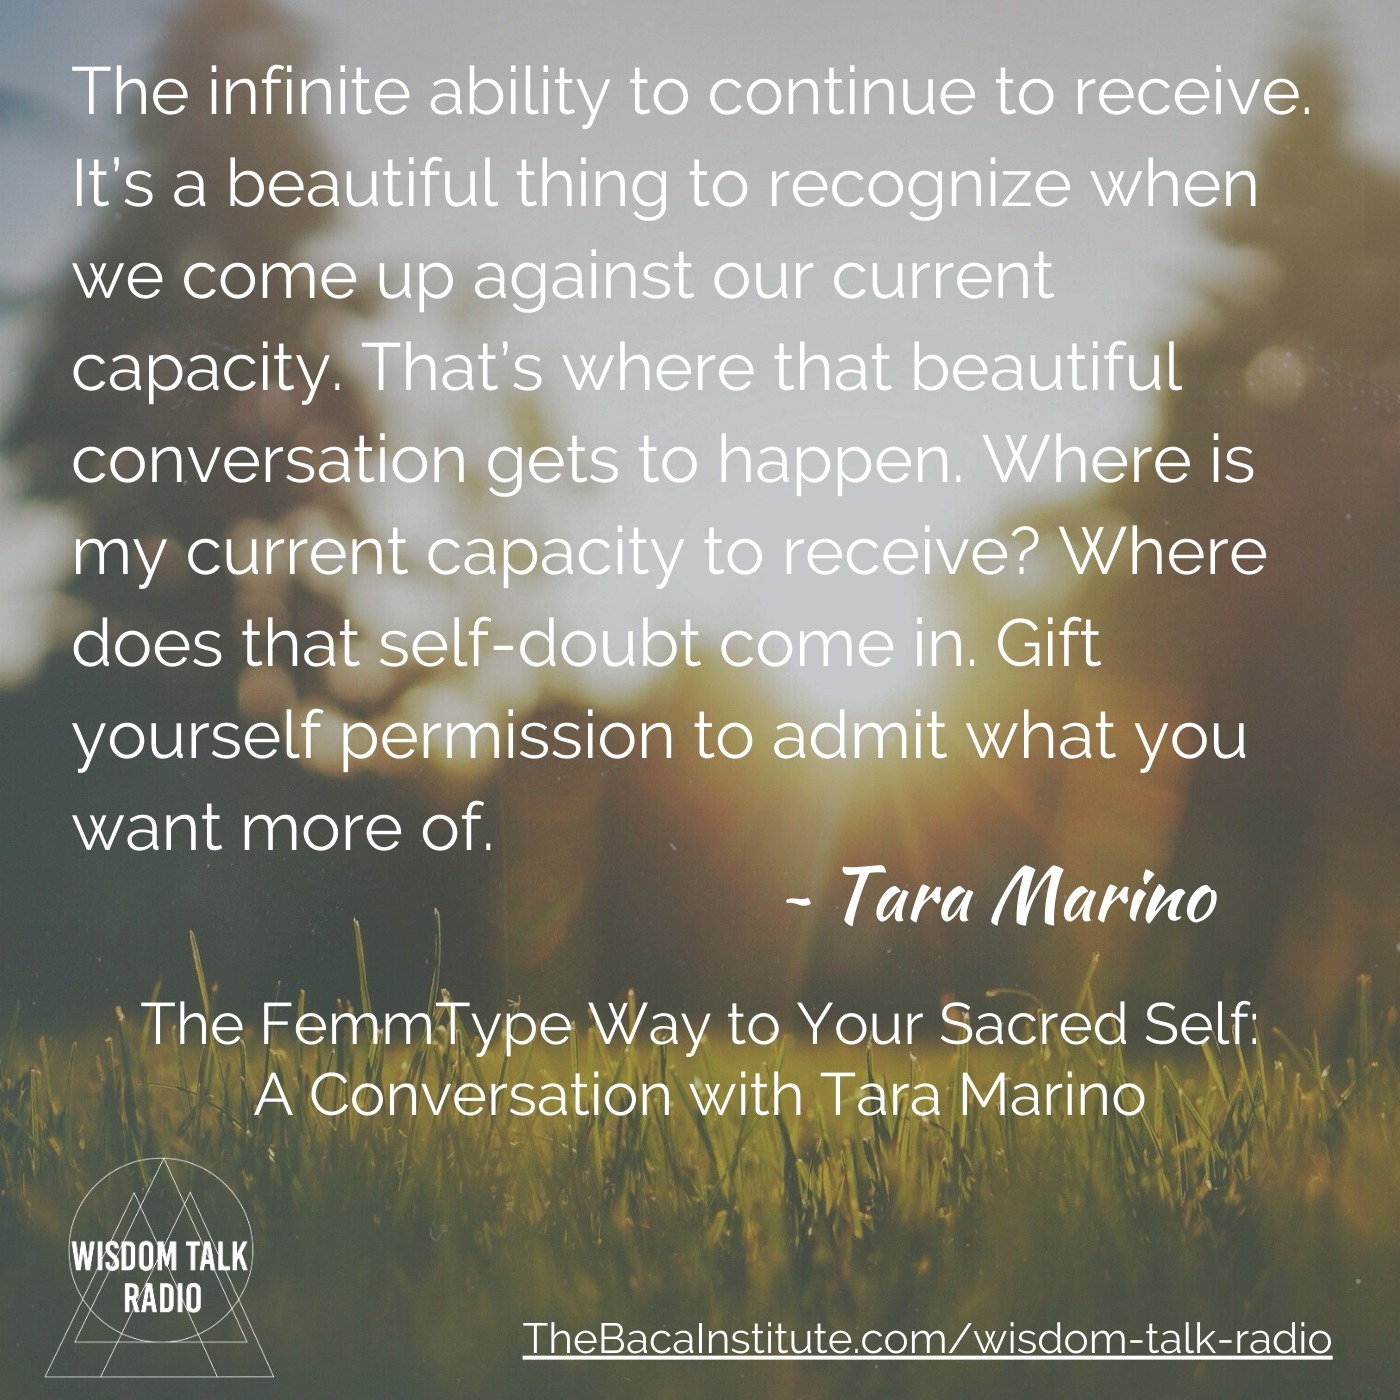 The FemmType Way to Your Sacred Self: a Conversation with Tara Marino